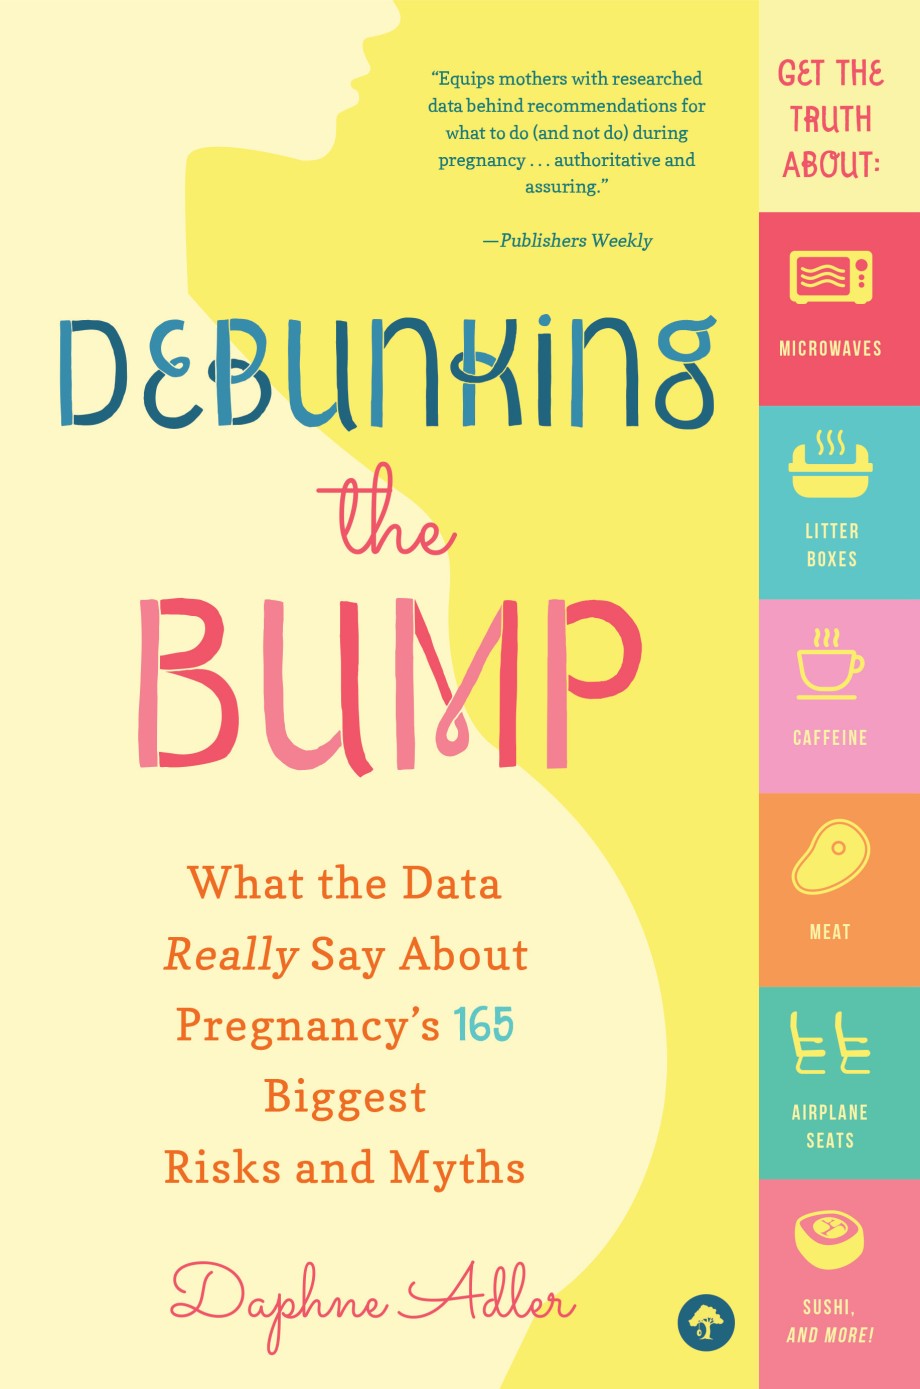 Debunking the Bump What the Data Really Says About Pregnancy's 165 Biggest Risks and Myths